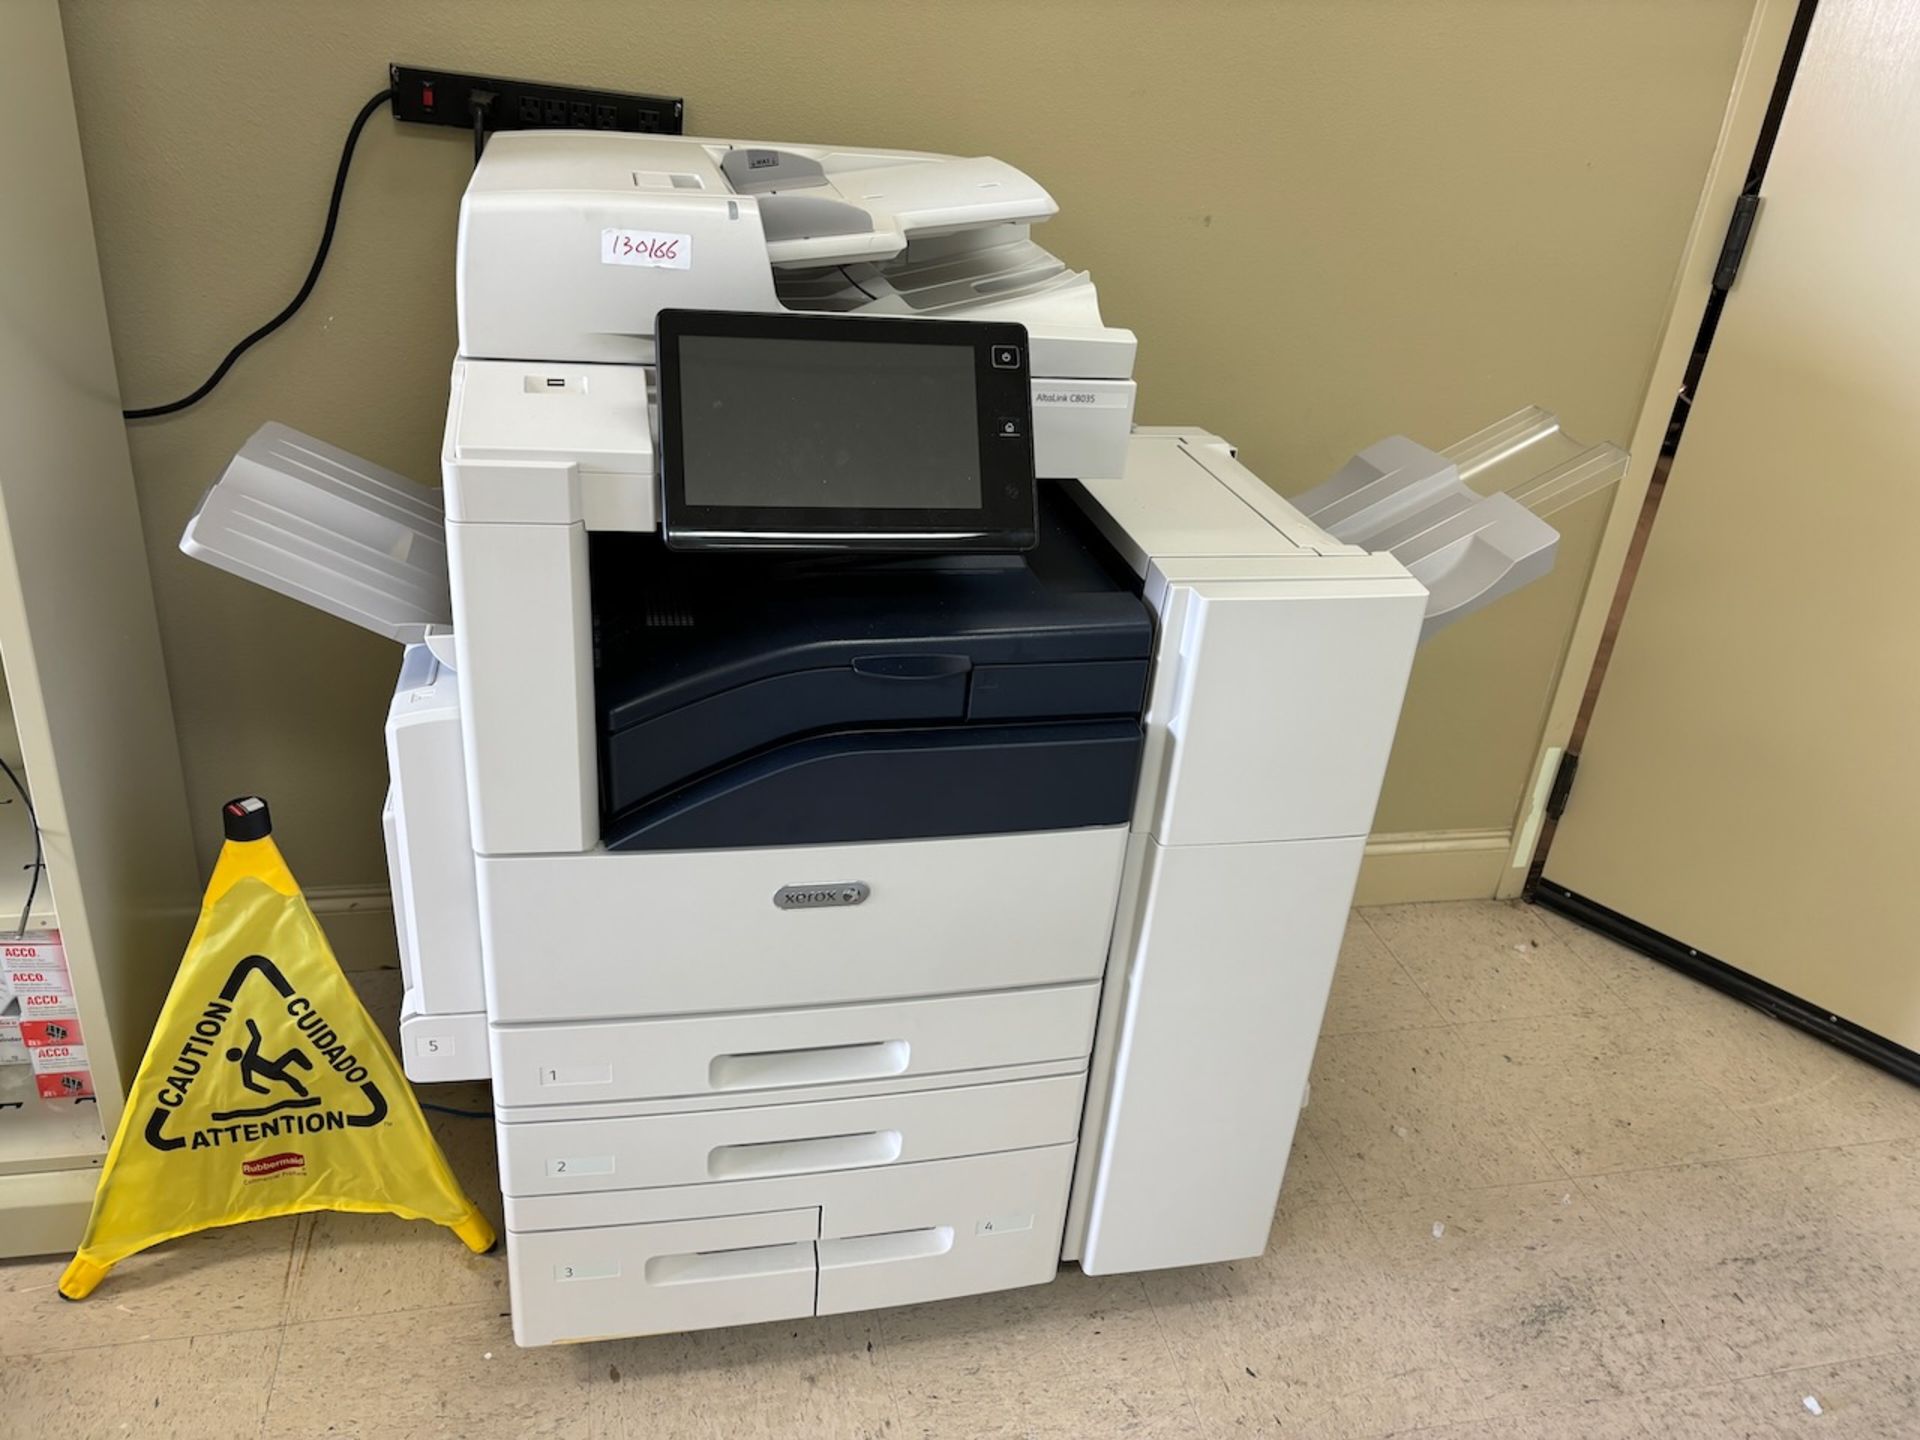 2019 Xerox Multifunction Color Printer - See Auctioneers Note